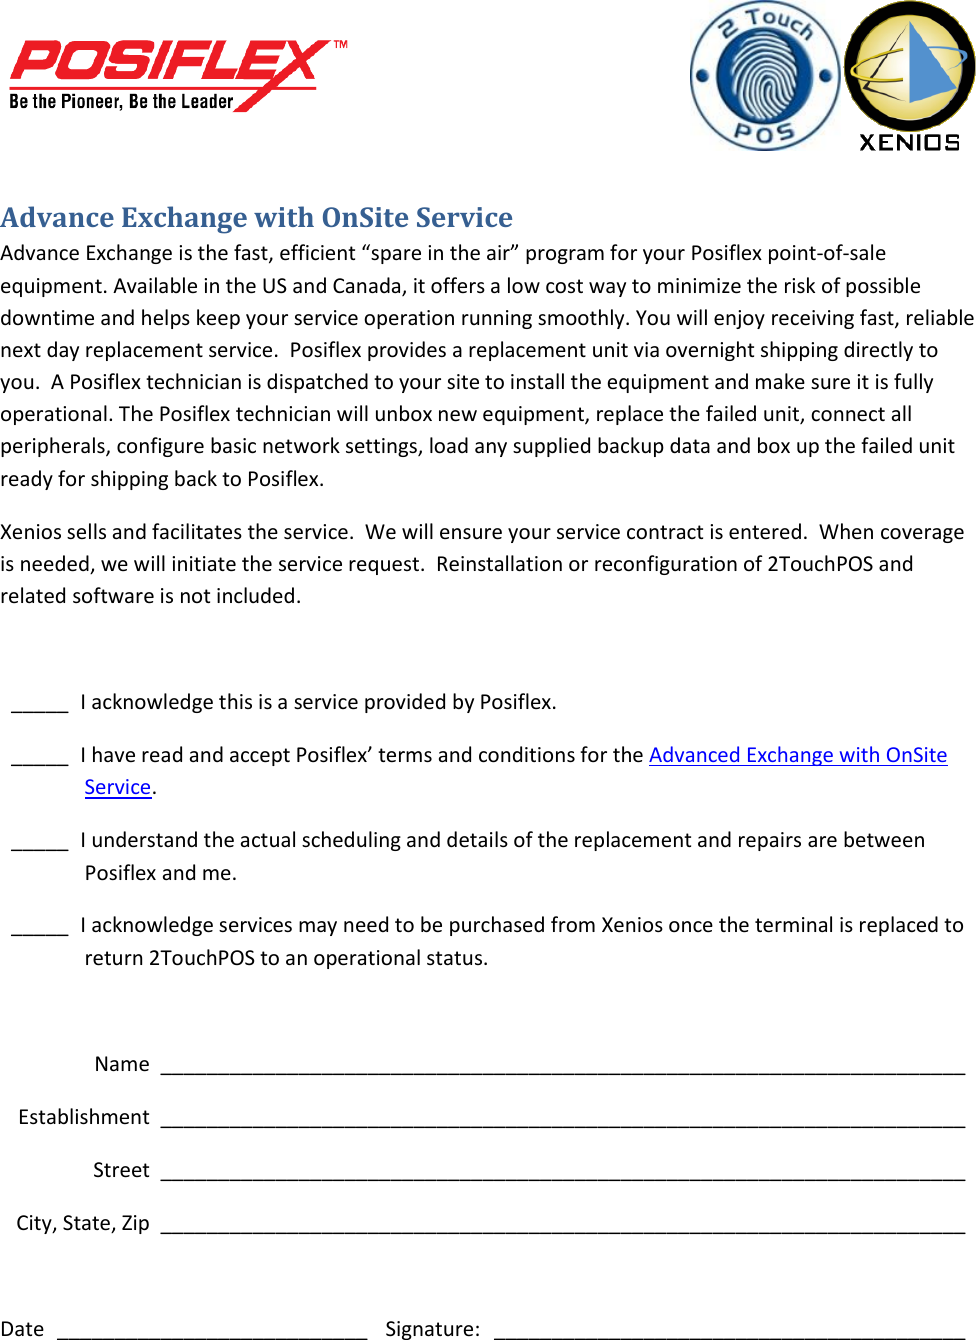 advance-exchange-with-on-site-service-customer-acknowledgement-form